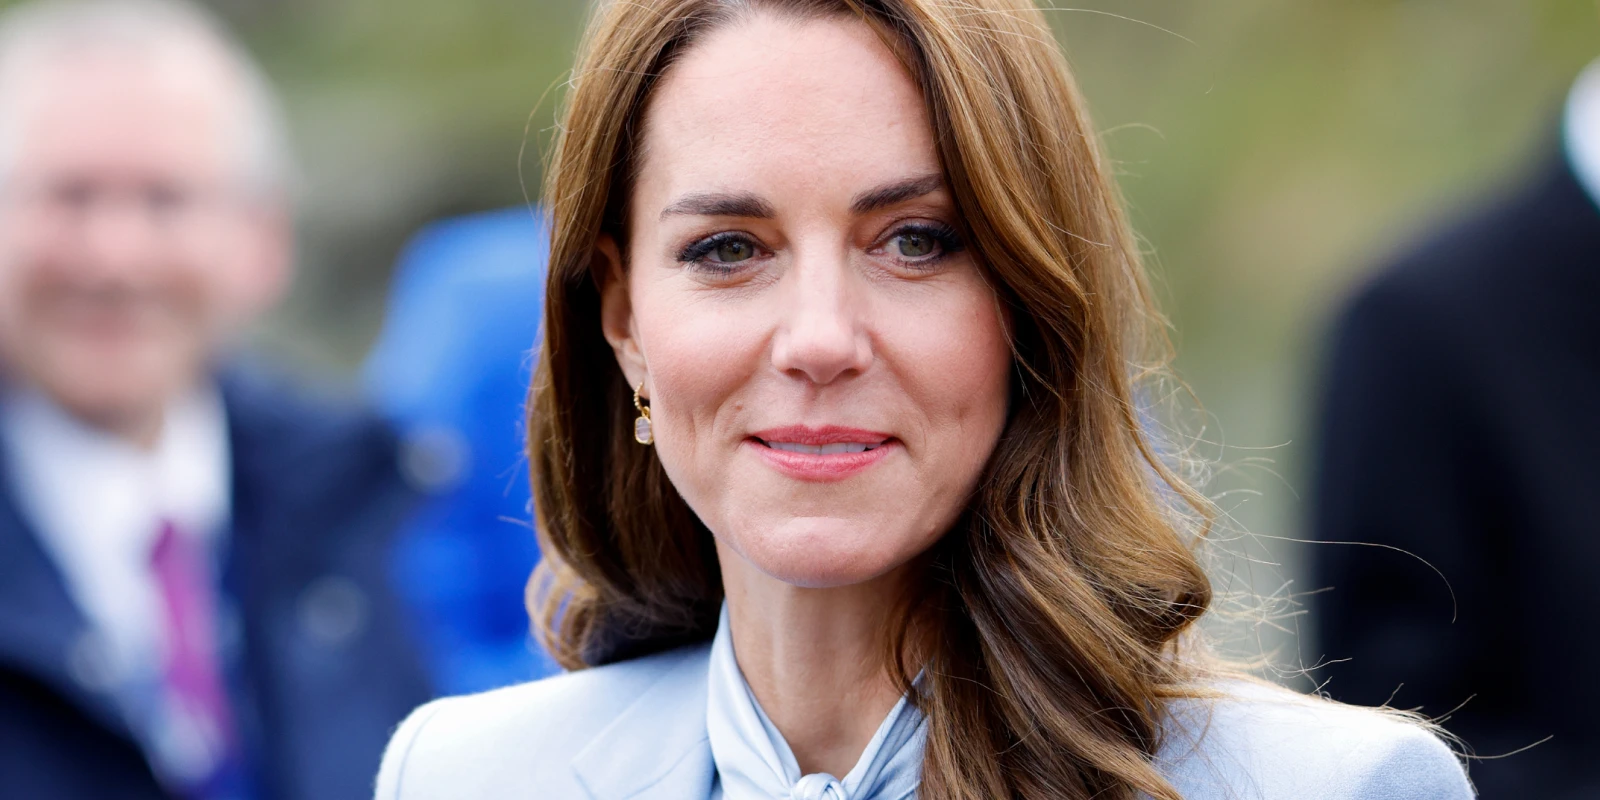 Kate Middleton just wore the most elegant blouse | Stylight